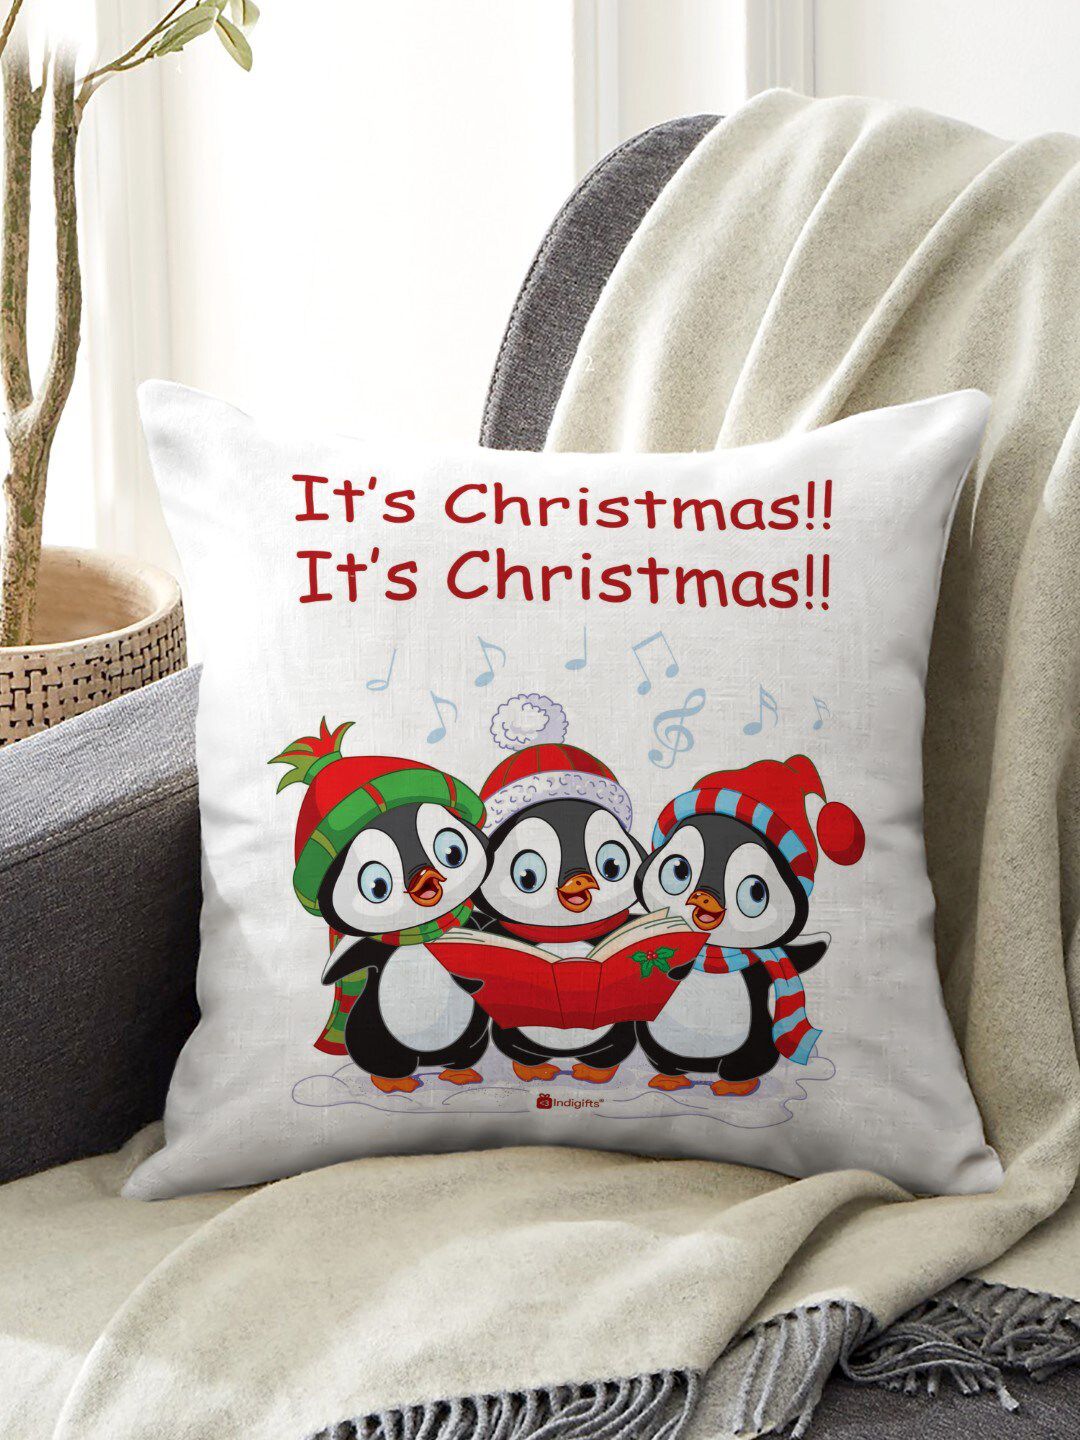 Indigifts White & Red Christmas Printed Square Cushion With Filler Price in India